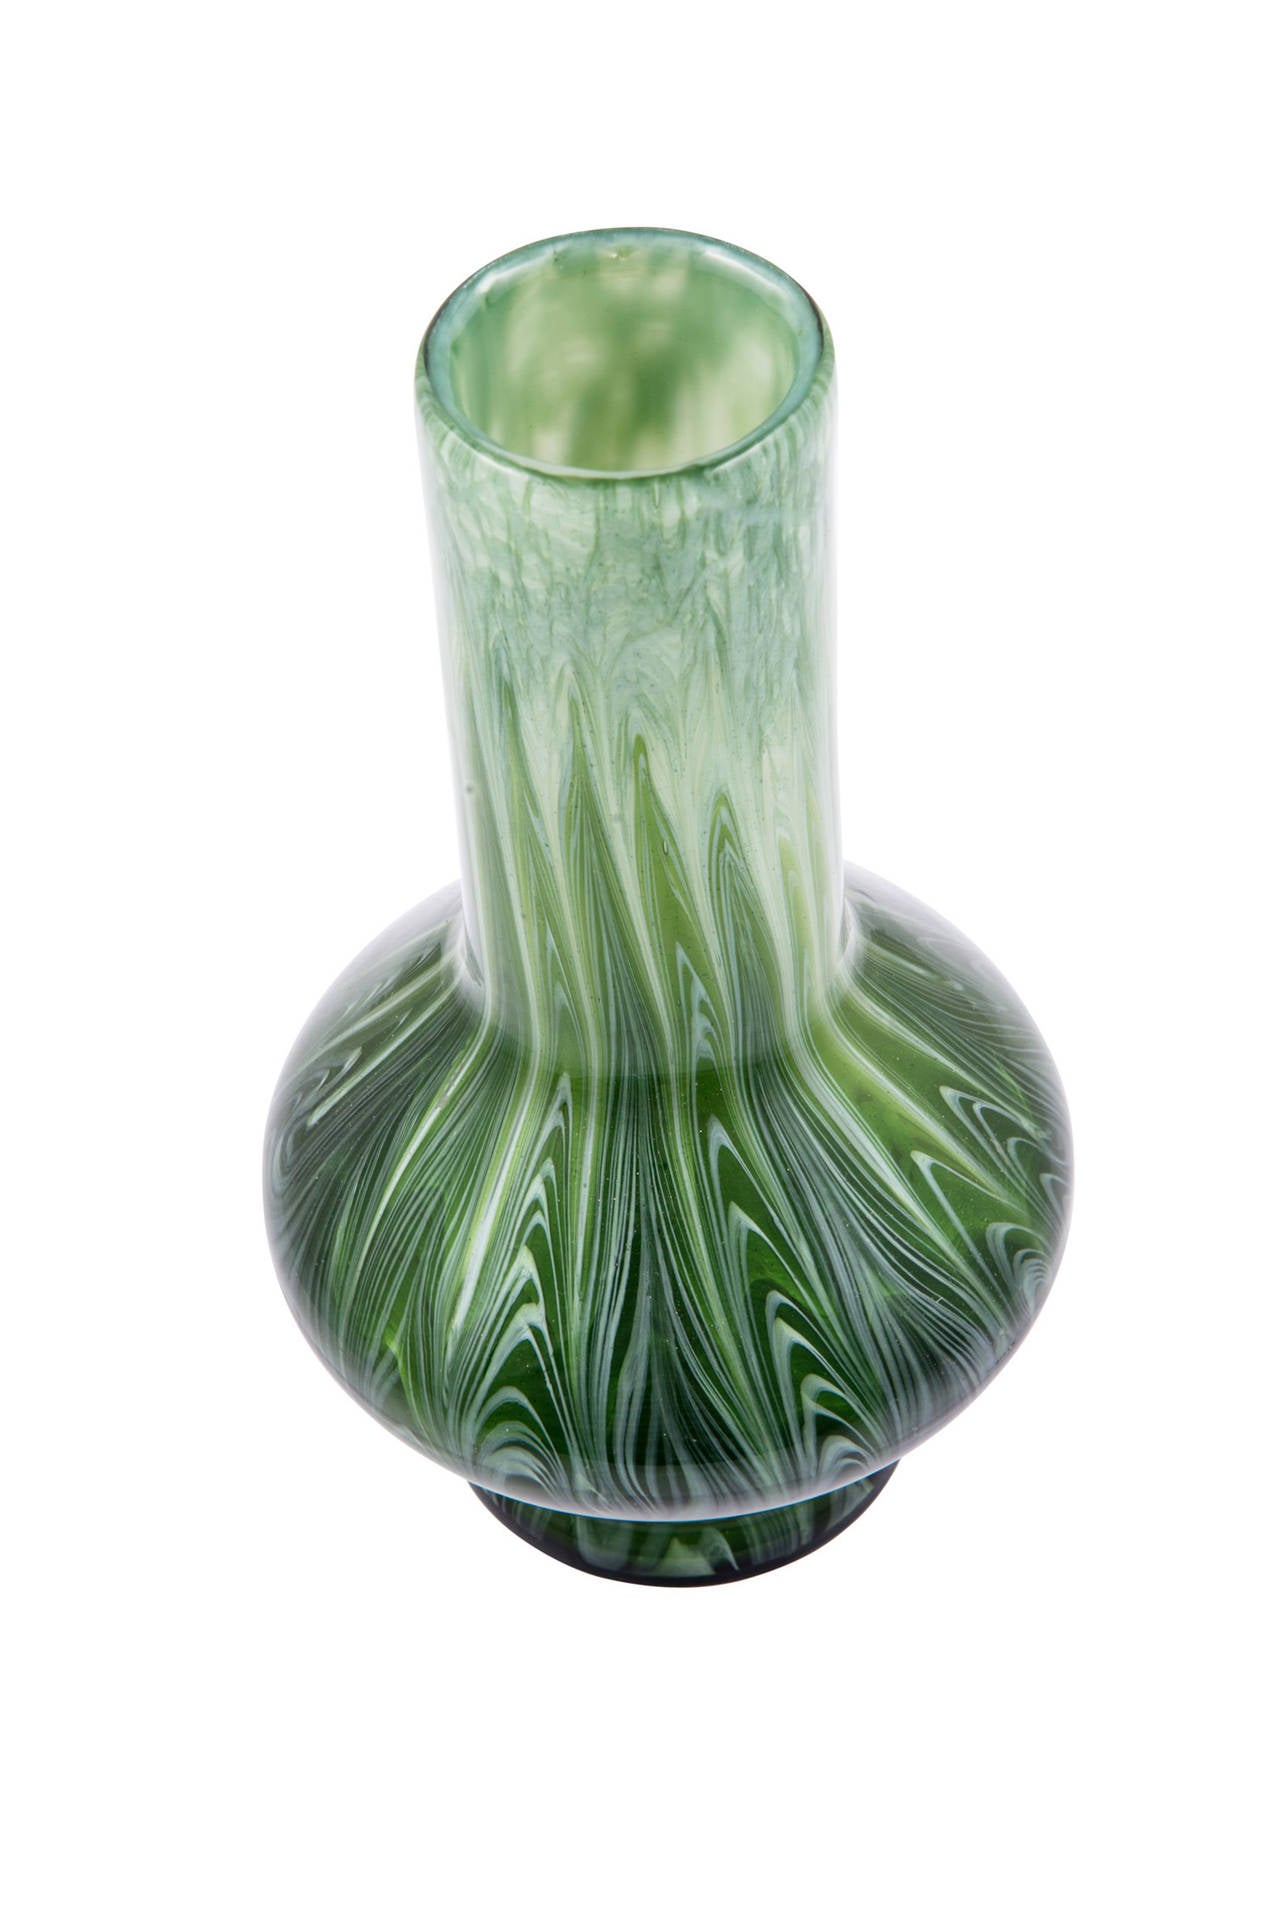 The group of decorations of the Titania group ranges among the most extravagant genres ever produced by Loetz. Glasses in this variant always proved to be a challenge for the executing craftsmen and every vase is slightly different.
This vase is